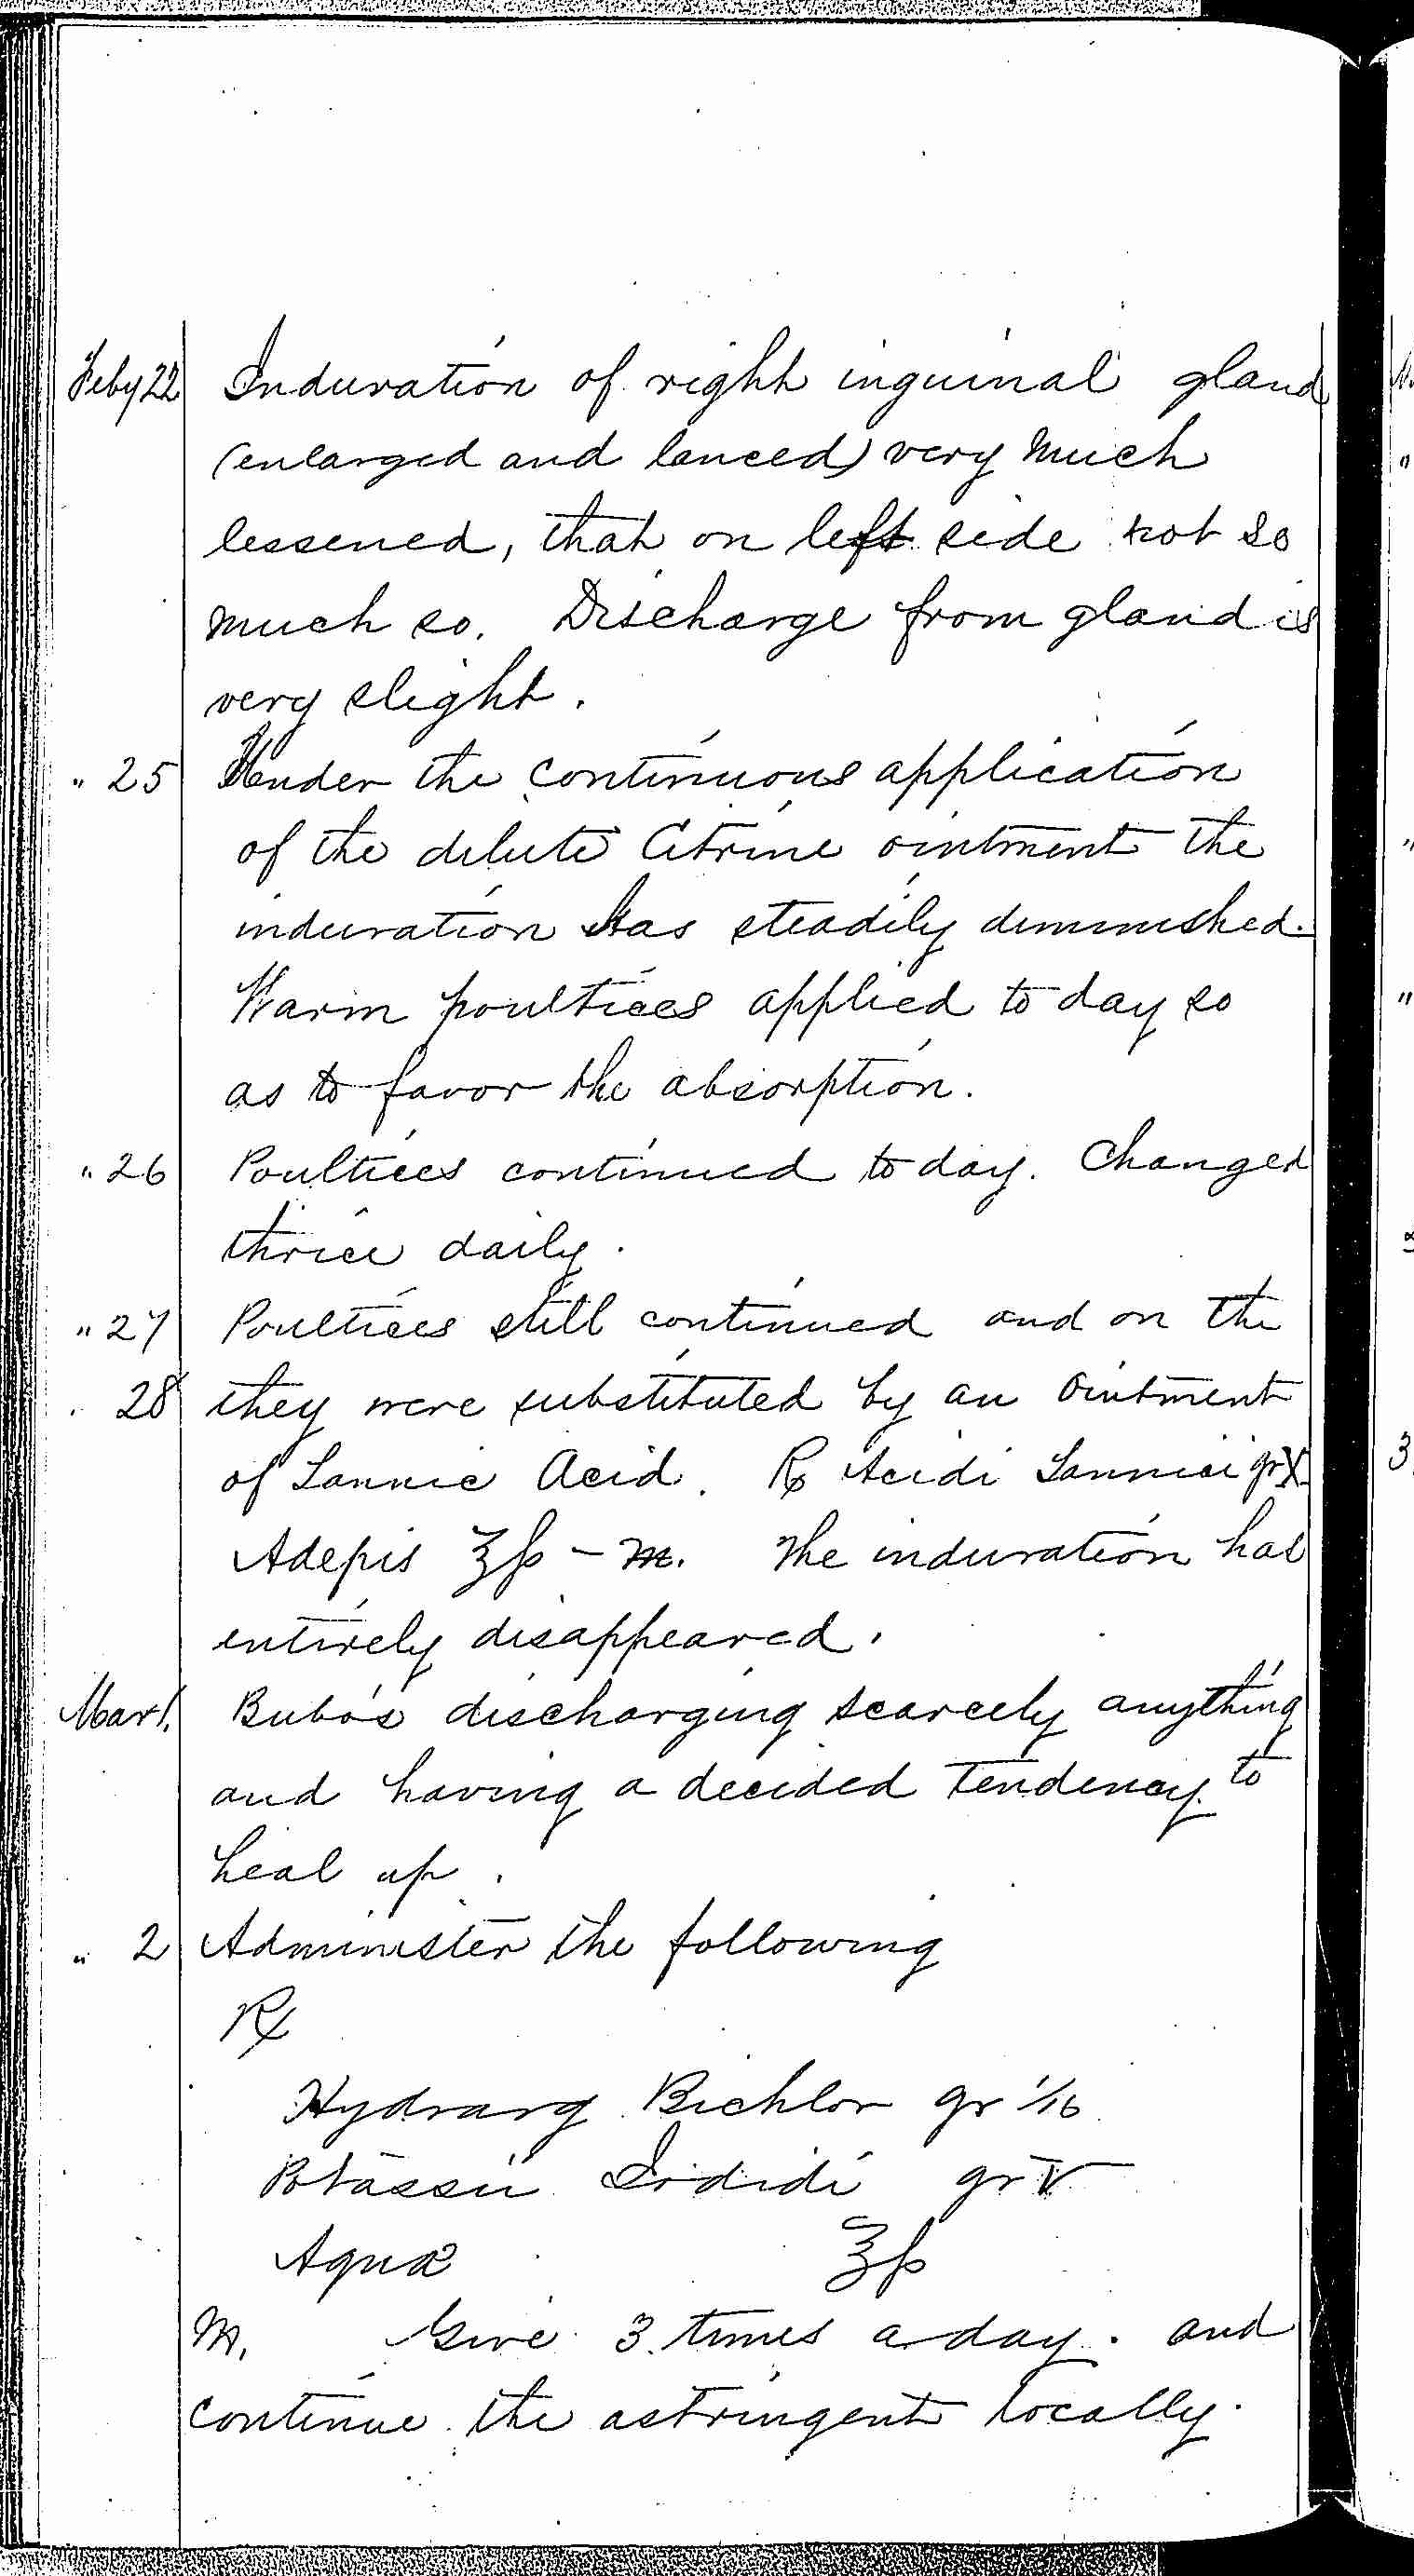 Entry for Lorenzo Parker (page 2 of 3) in the log Hospital Tickets and Case Papers - Naval Hospital - Washington, D.C. - 1868-69